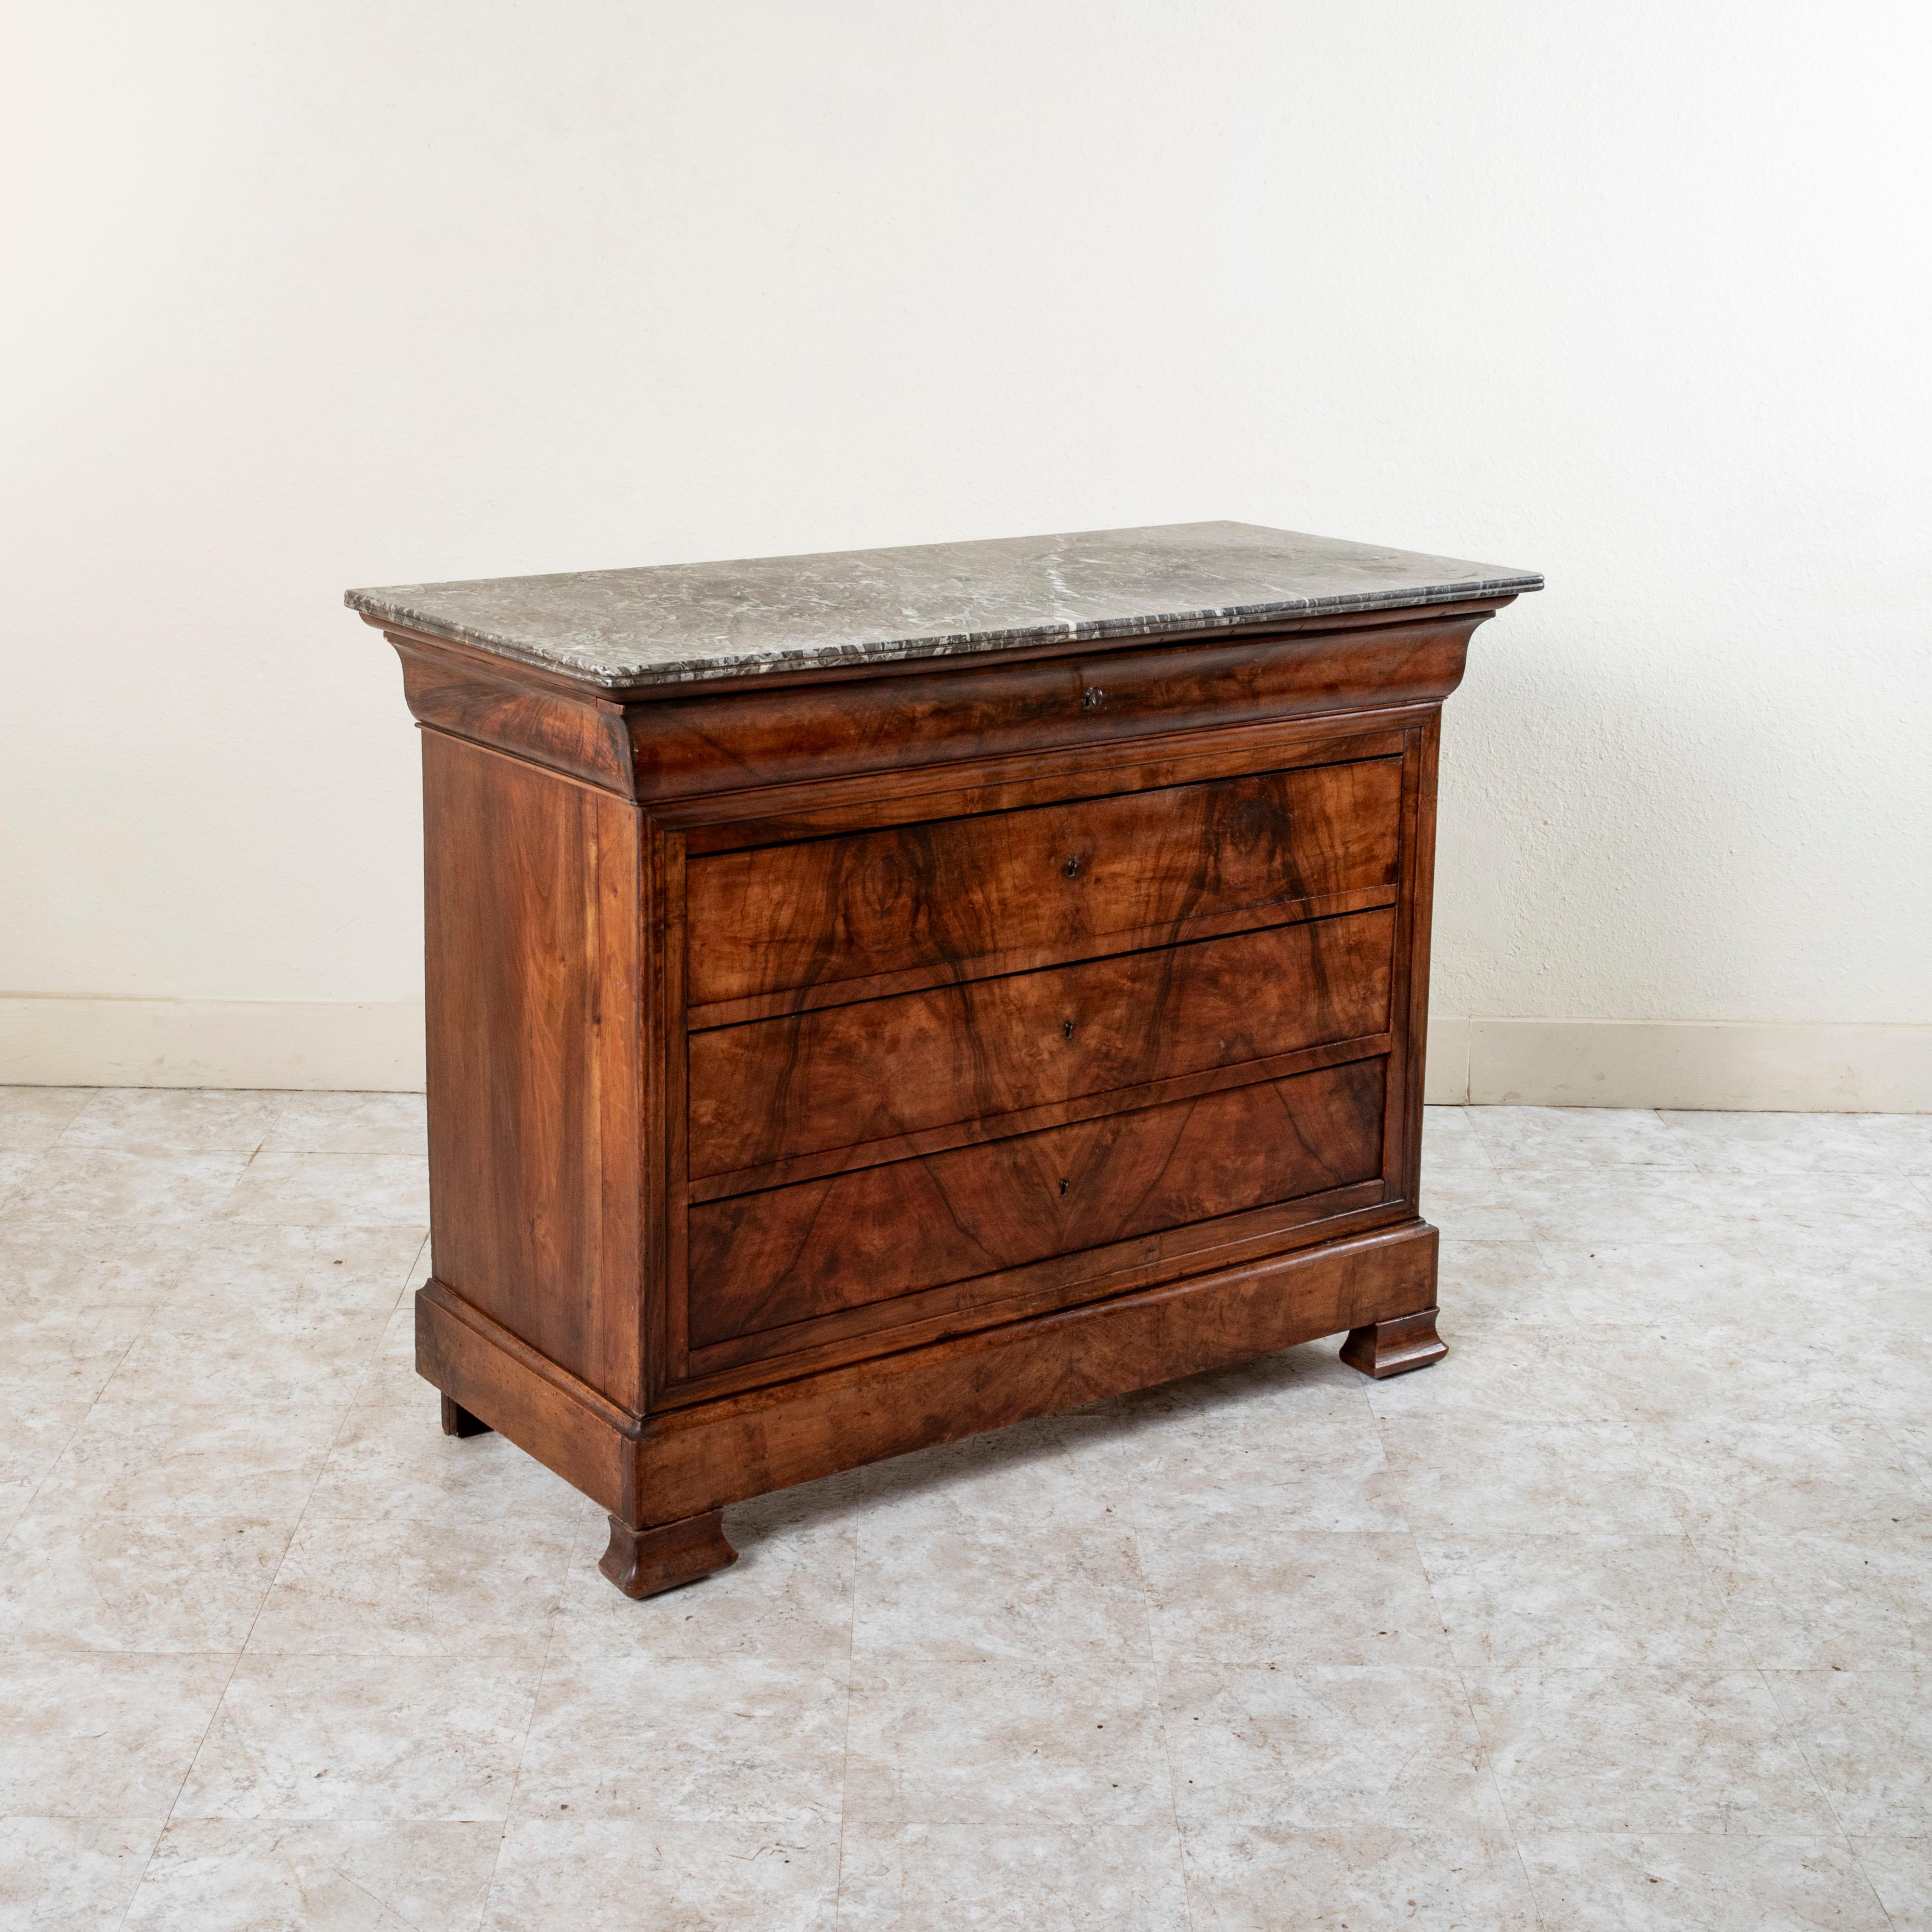 19th Century French Louis Philippe Period Burl Walnut Commode or Chest, Marble In Good Condition For Sale In Fayetteville, AR